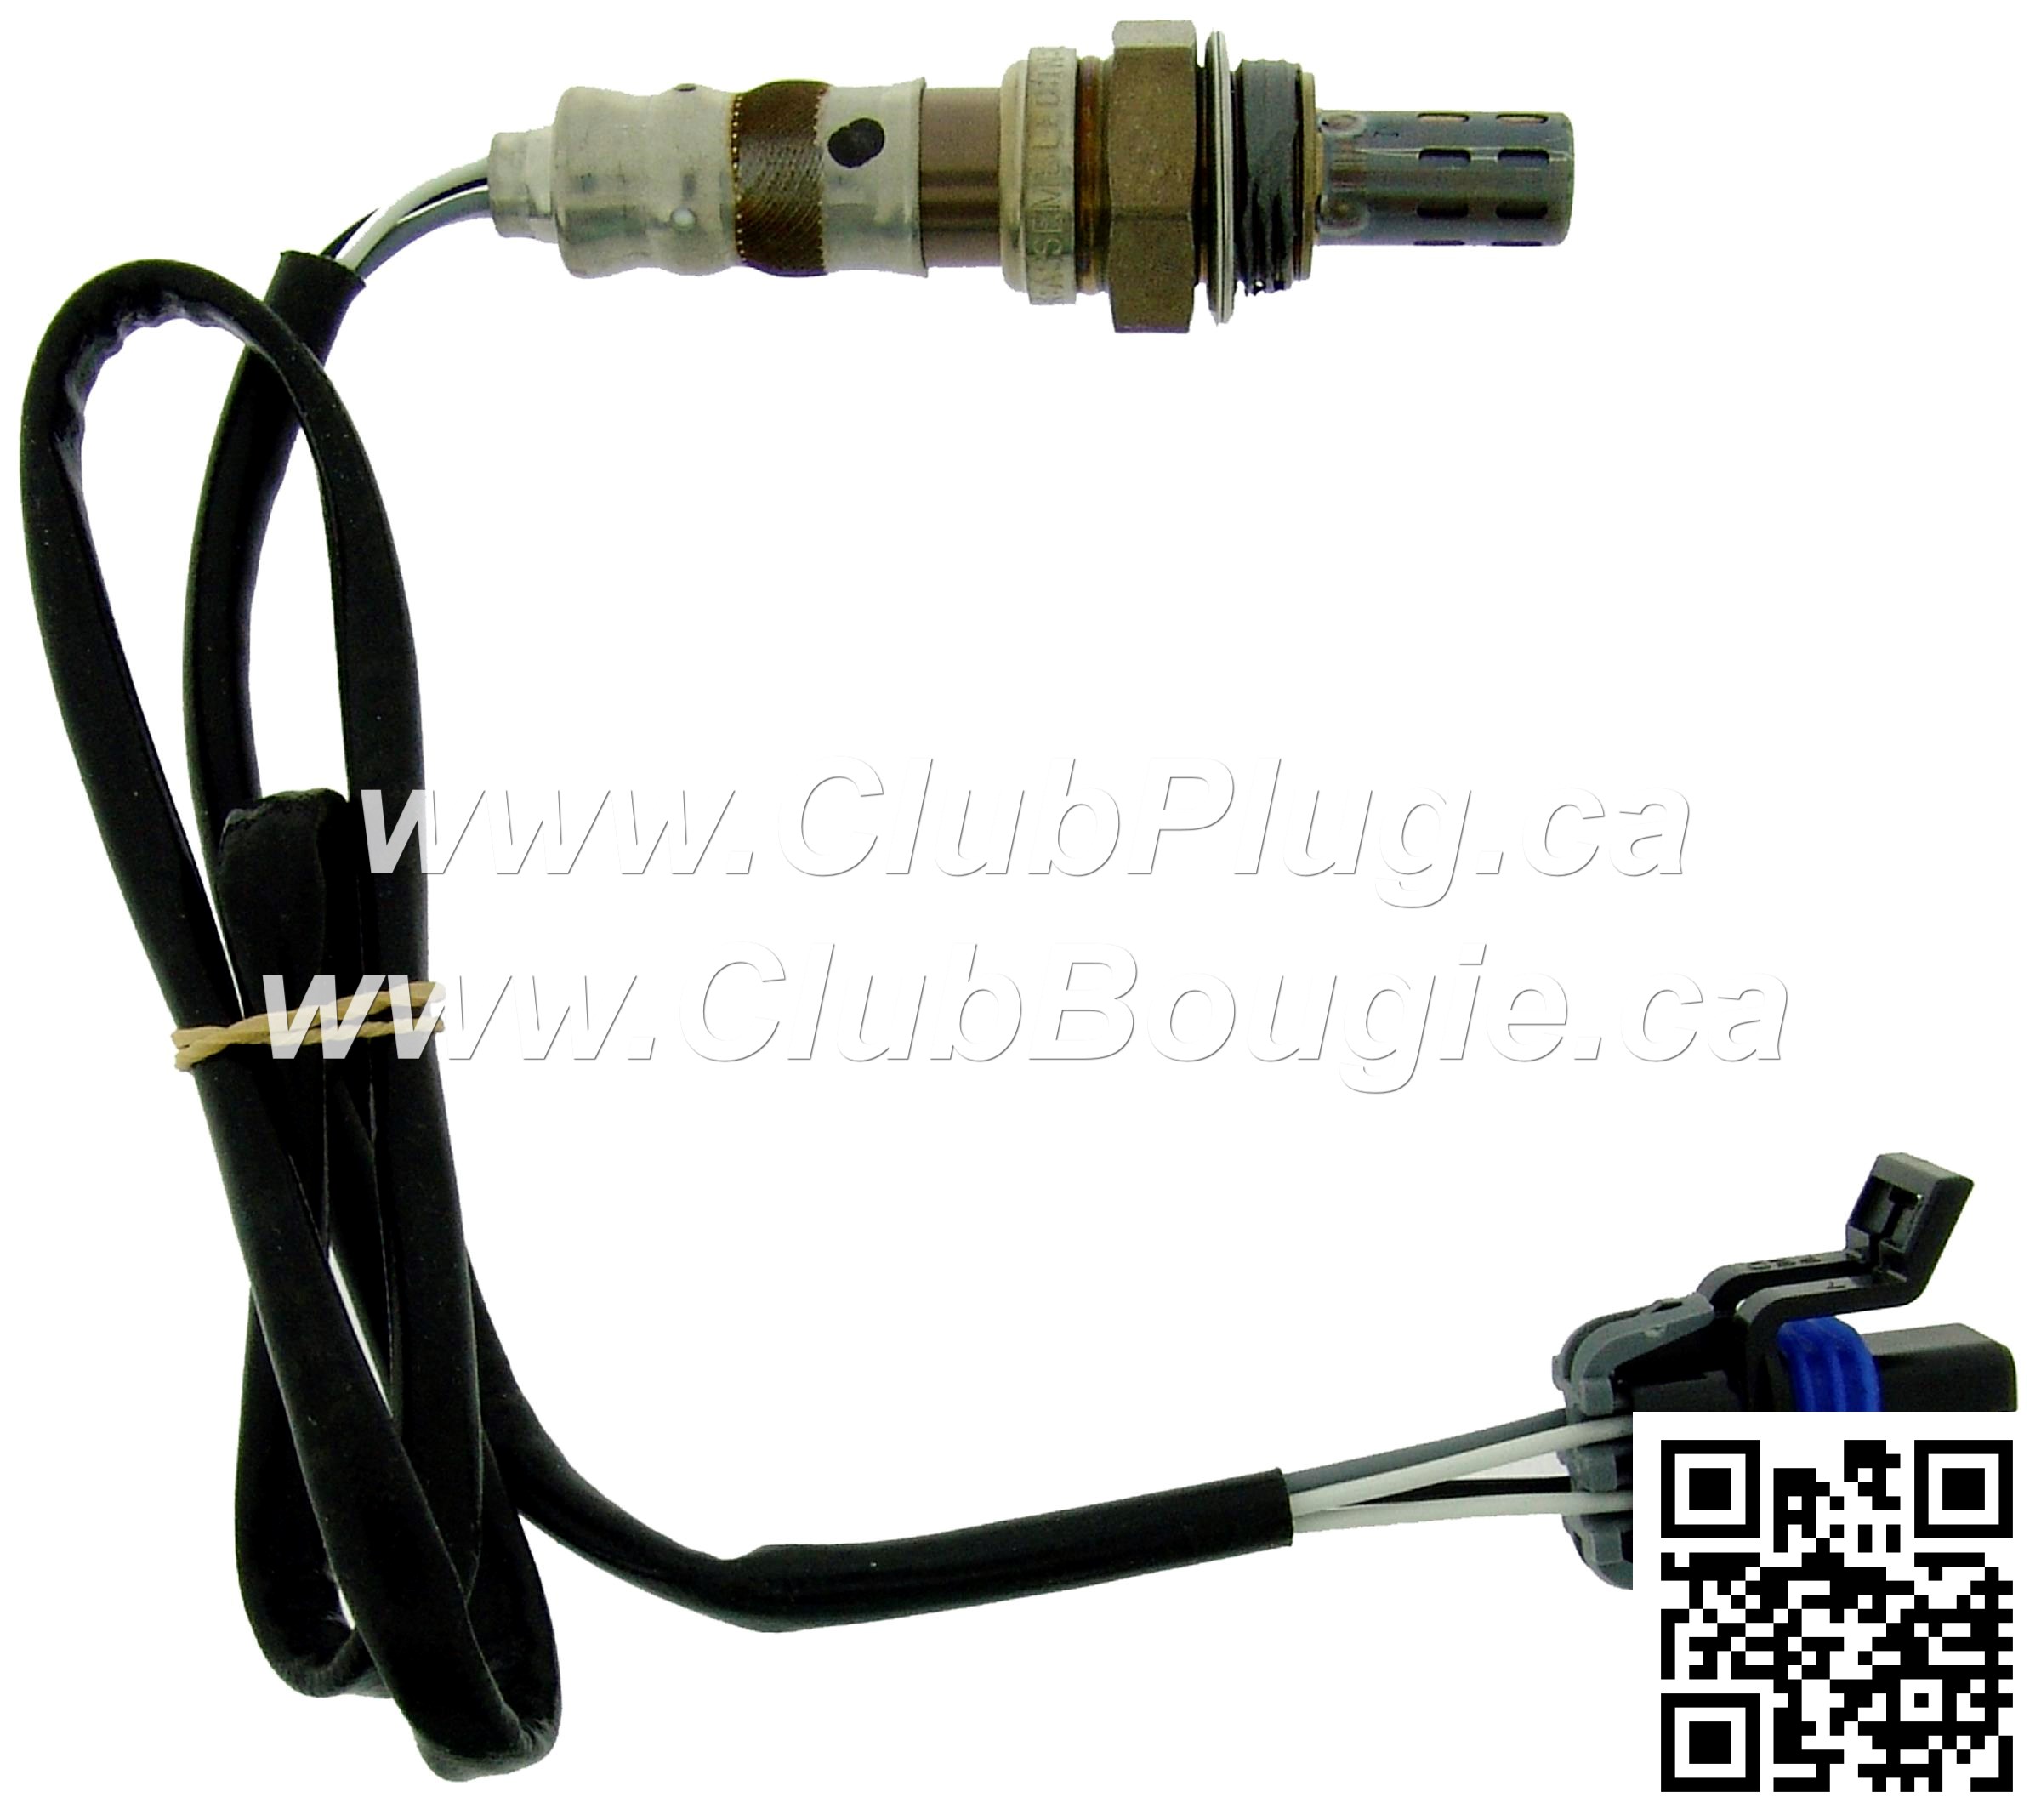 NGK Canada Sprak Plugs, Wire Sets, O2 Sensors, picture